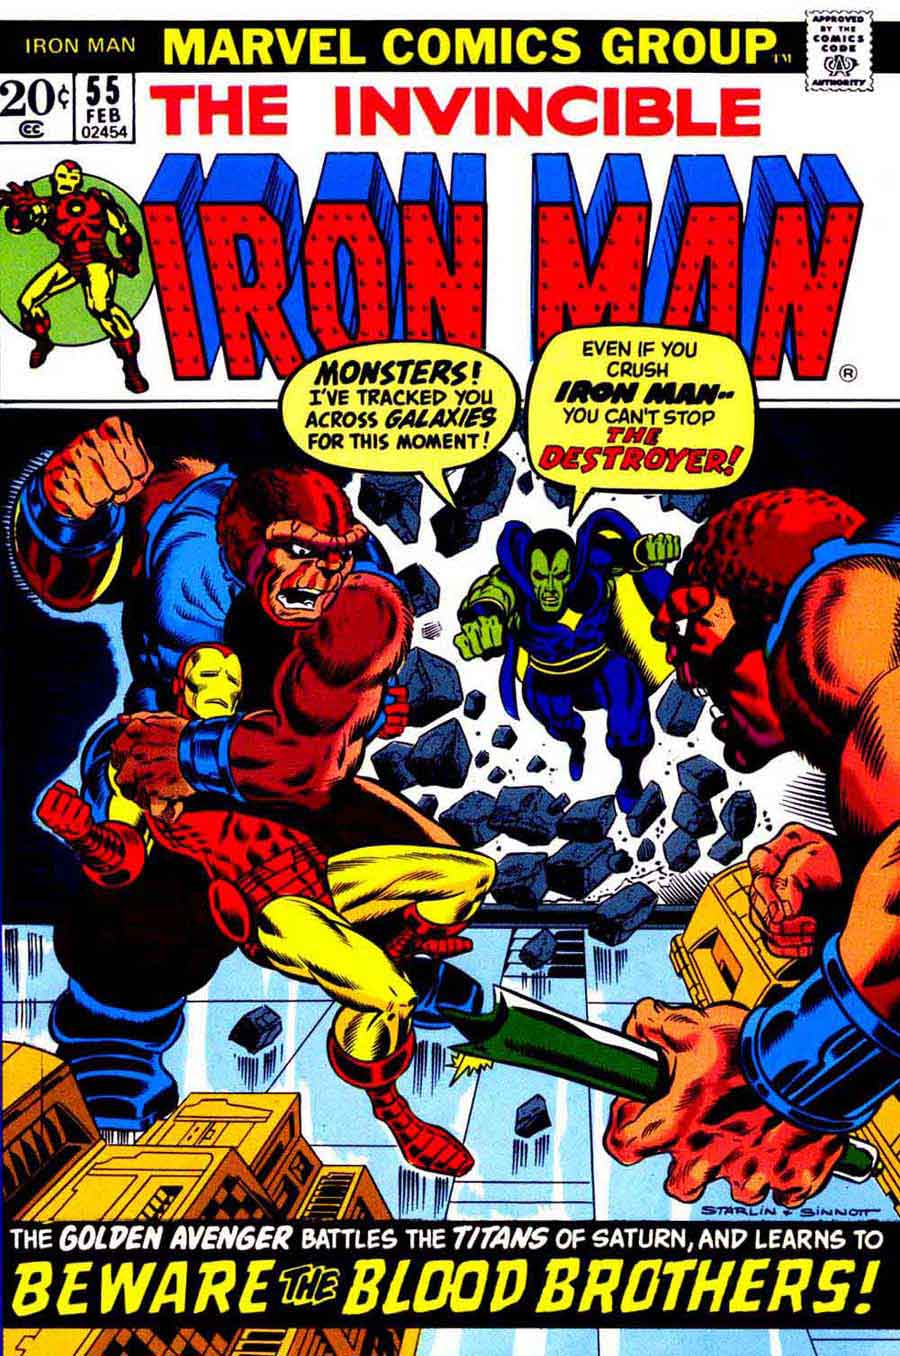 Iron Man #55 marvel key issue key 1970s bronze age Jim Starlin comic book cover - 1st appearance Thanos, Drax the Destroyer